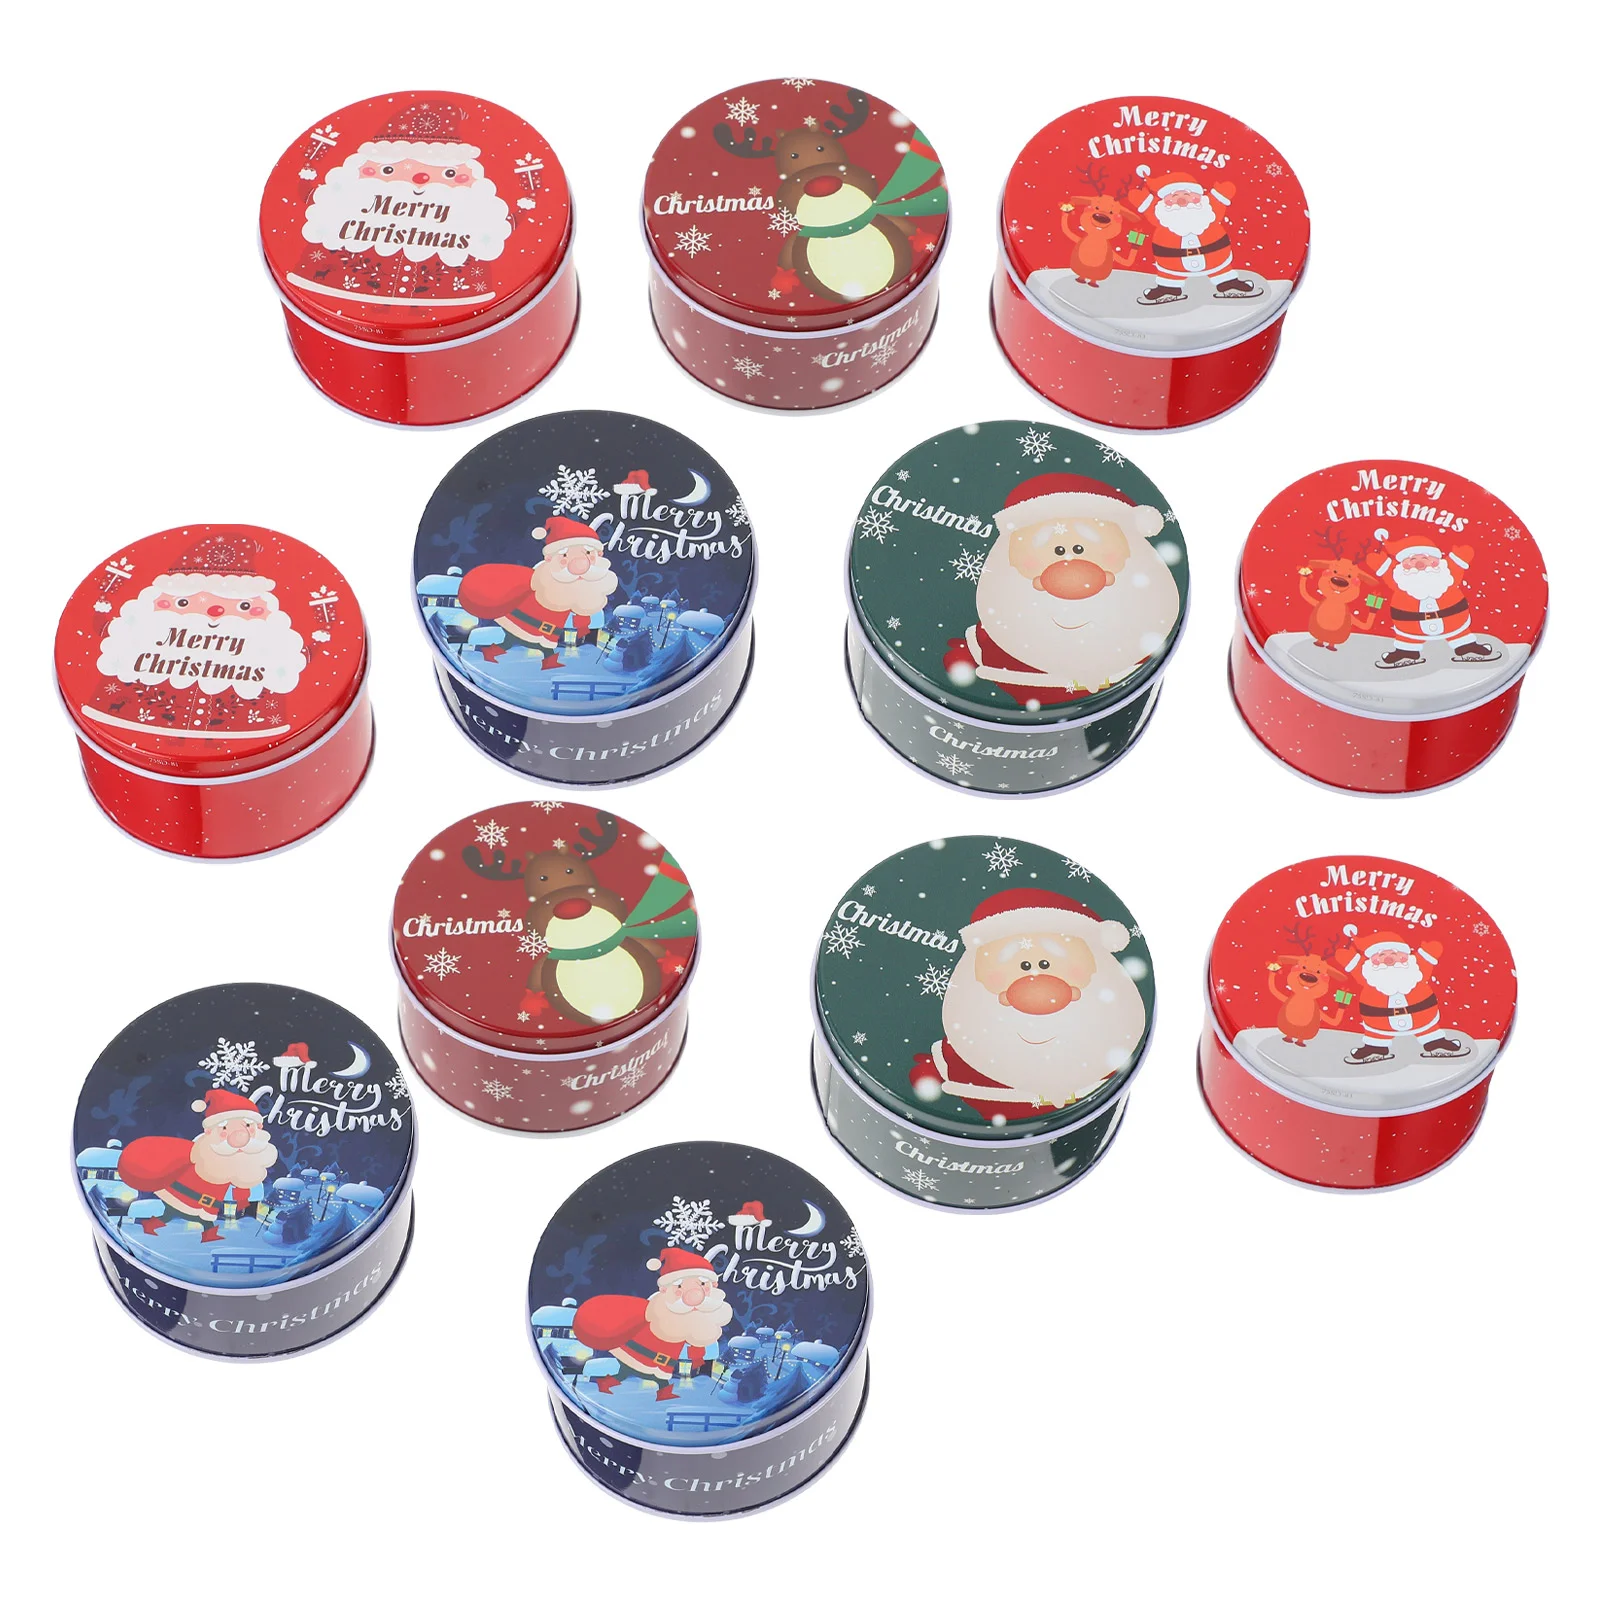 

Christmas Cookie Gift Tins Tin Candy Boxes Box Giving Lids Metal Storage Containers Tinplate Container Empty Jars Round Jar